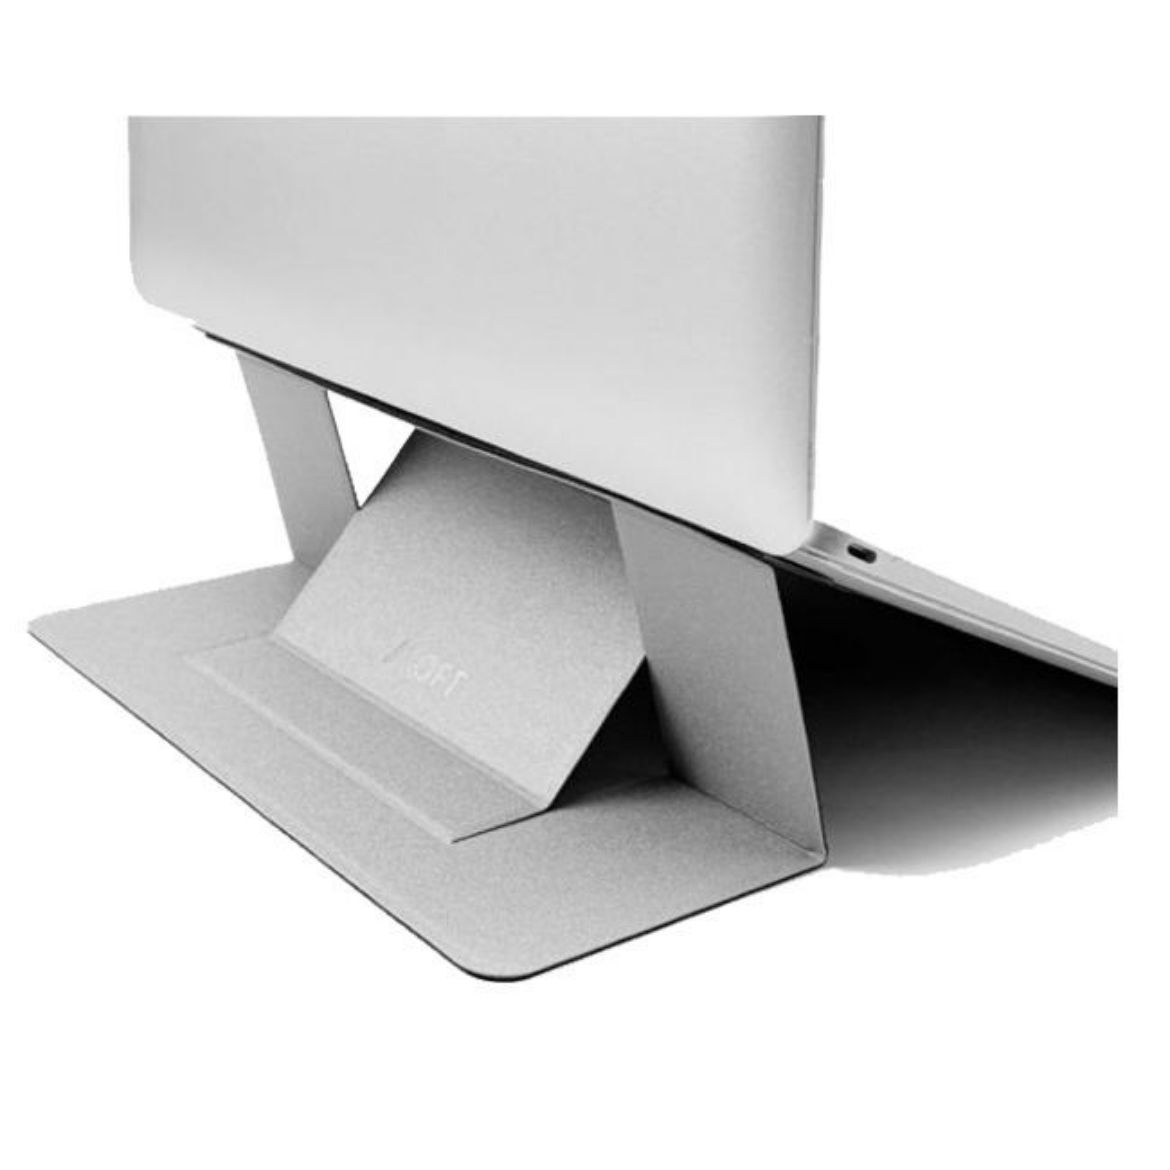 Picture of Moft Laptop Stand - Silver